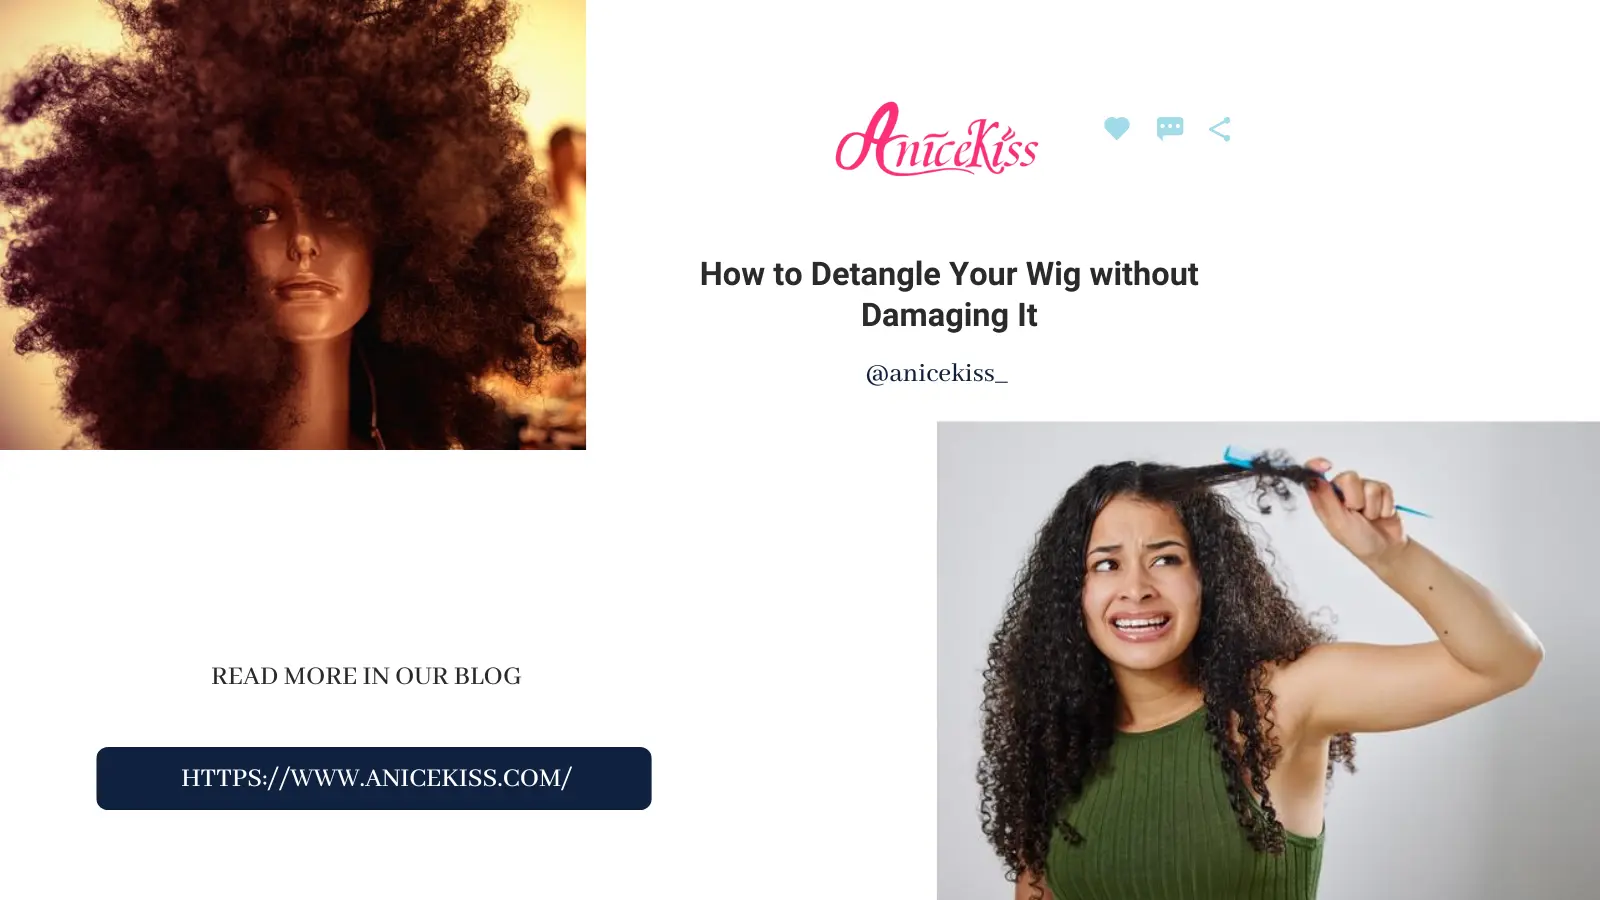 How to Detangle Your Wig without Damaging It